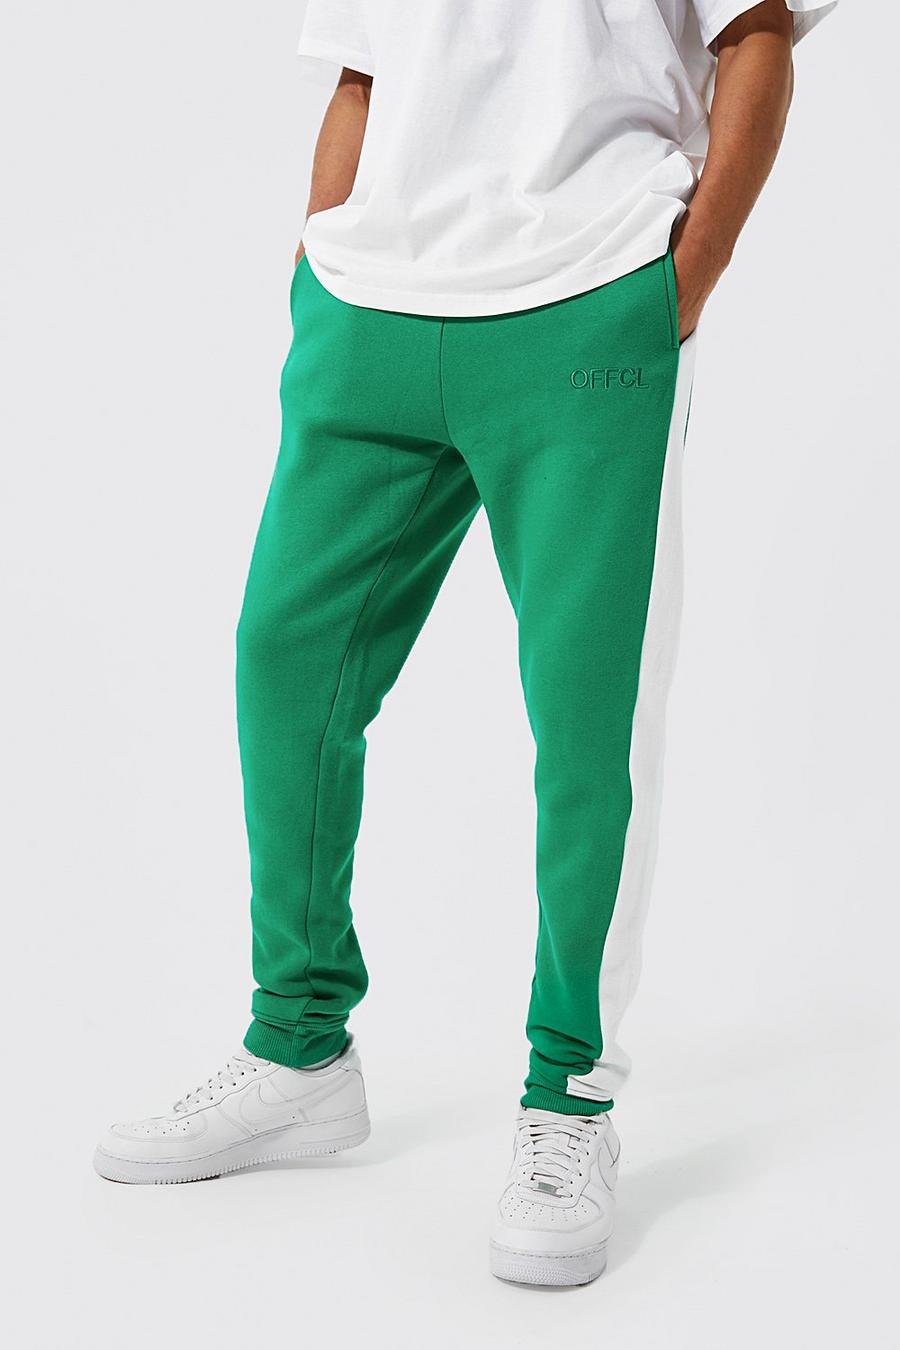 Bright green Tall Offcl Skinny Side Panel Jogger